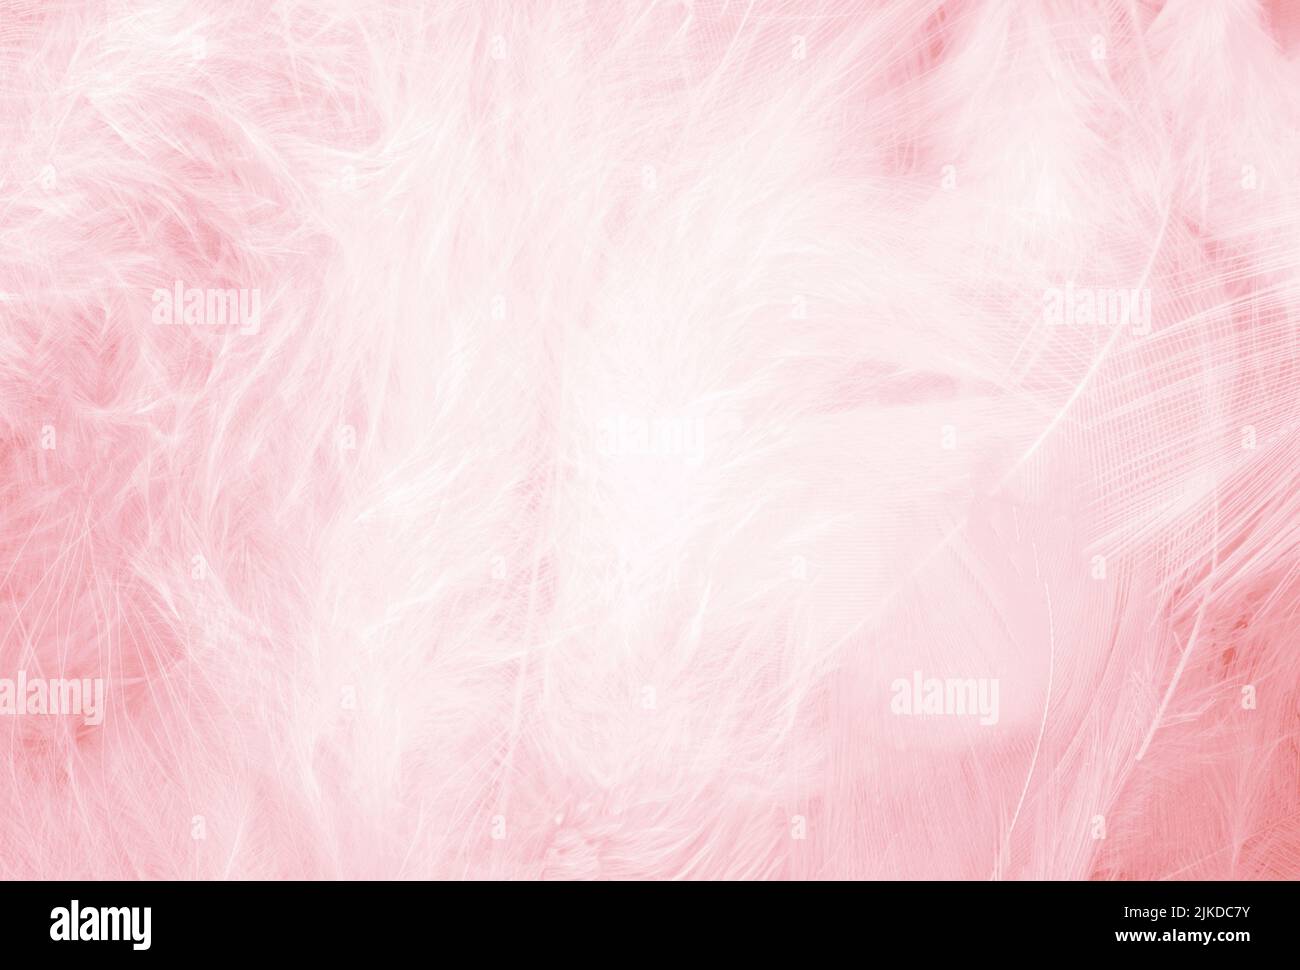 Coral pink vintage,feather pattern texture Stock Photo